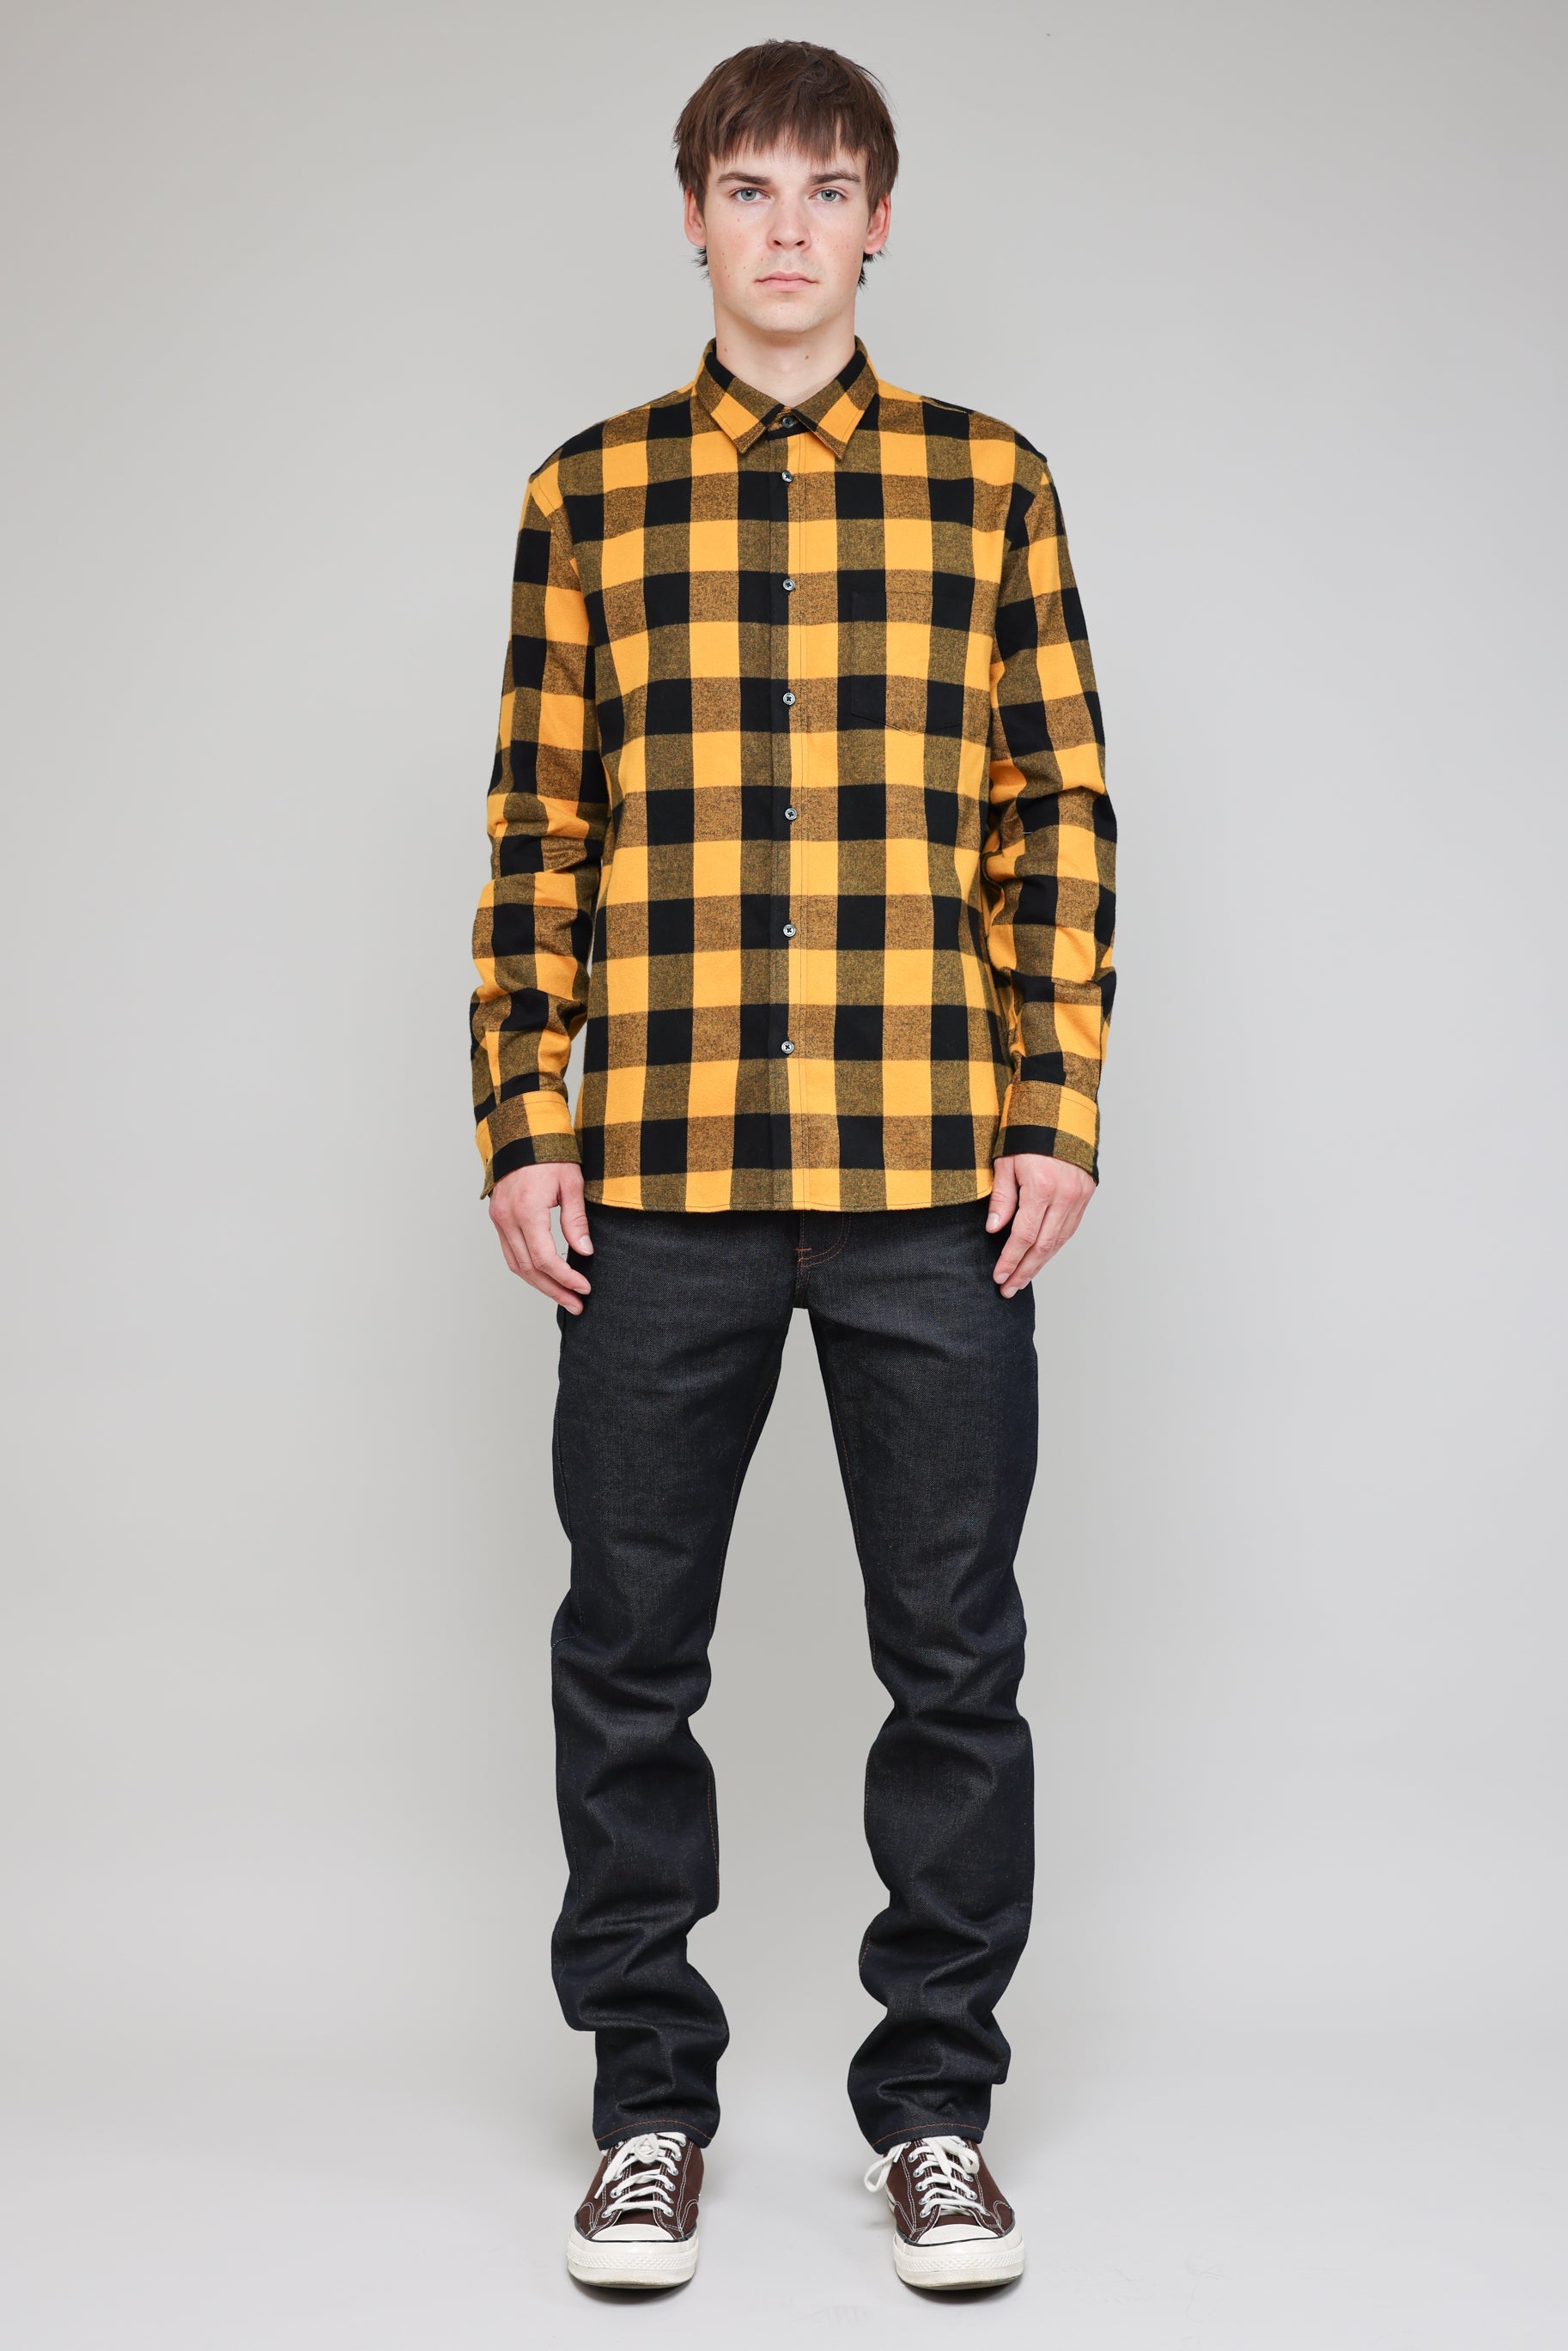 Japanese Brushed Buffalo Plaid in Yellow and Black 05